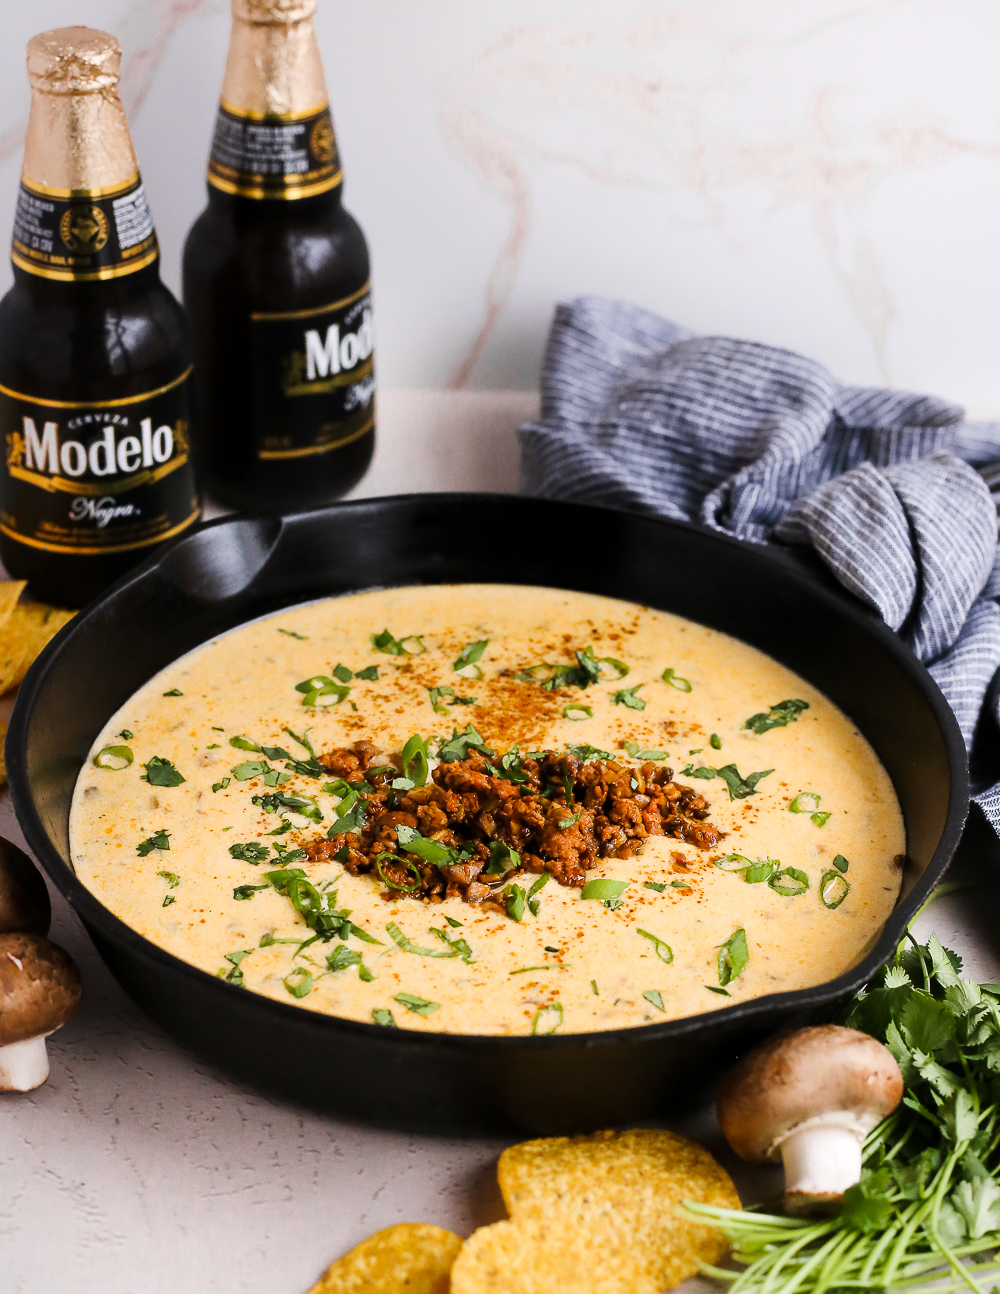 Styled image of a green chile queso recipe, served in a black cast iron skillet on a kitchen counter with tortilla chips and bottles of Mexican beer